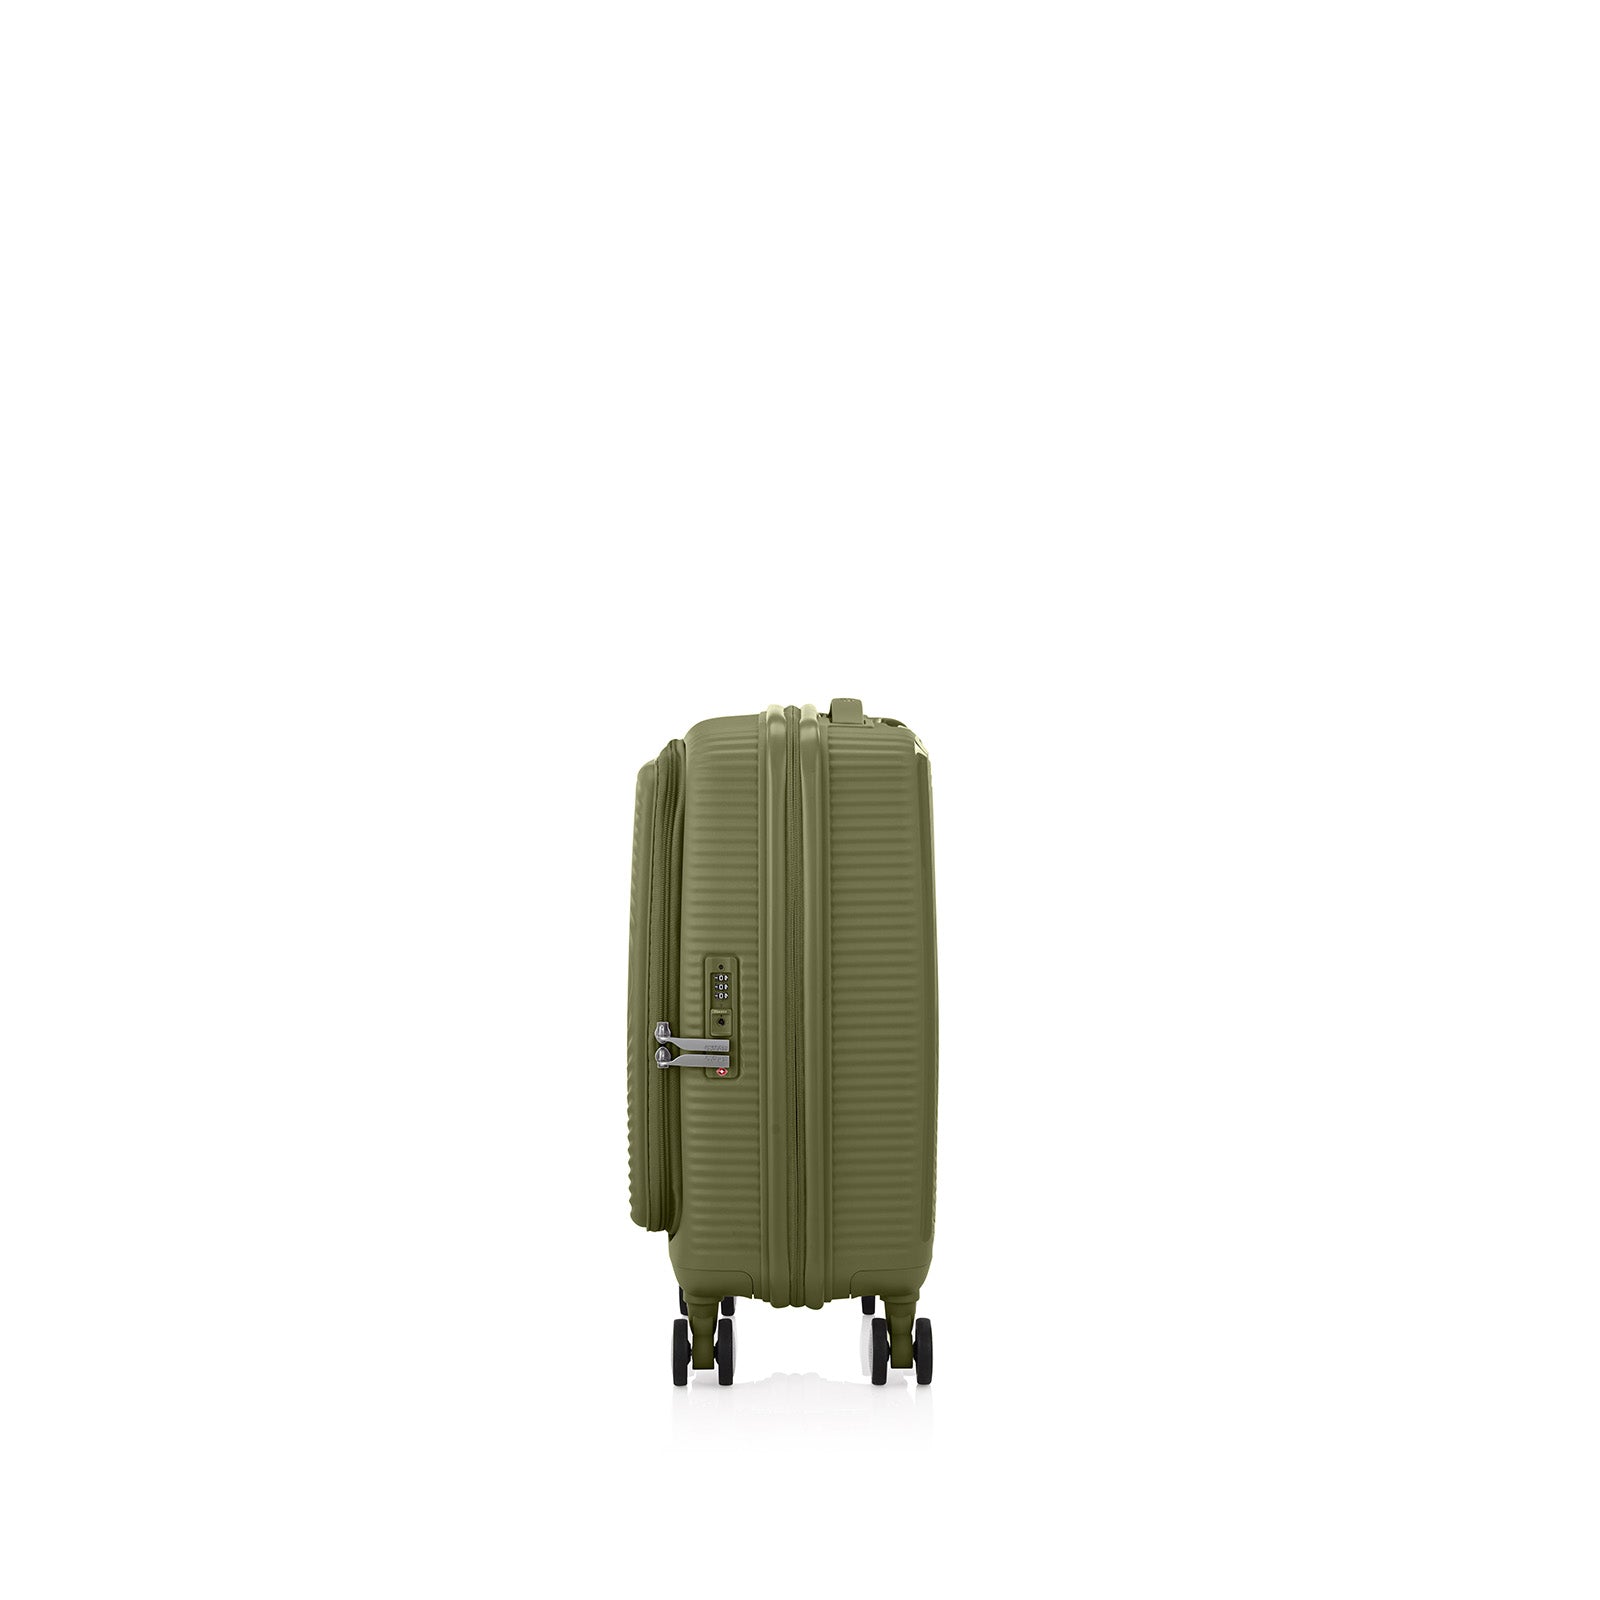 American-Tourister-Curio-Book-Opening-55cm-Carry-On-Suitcase-Khaki-Side